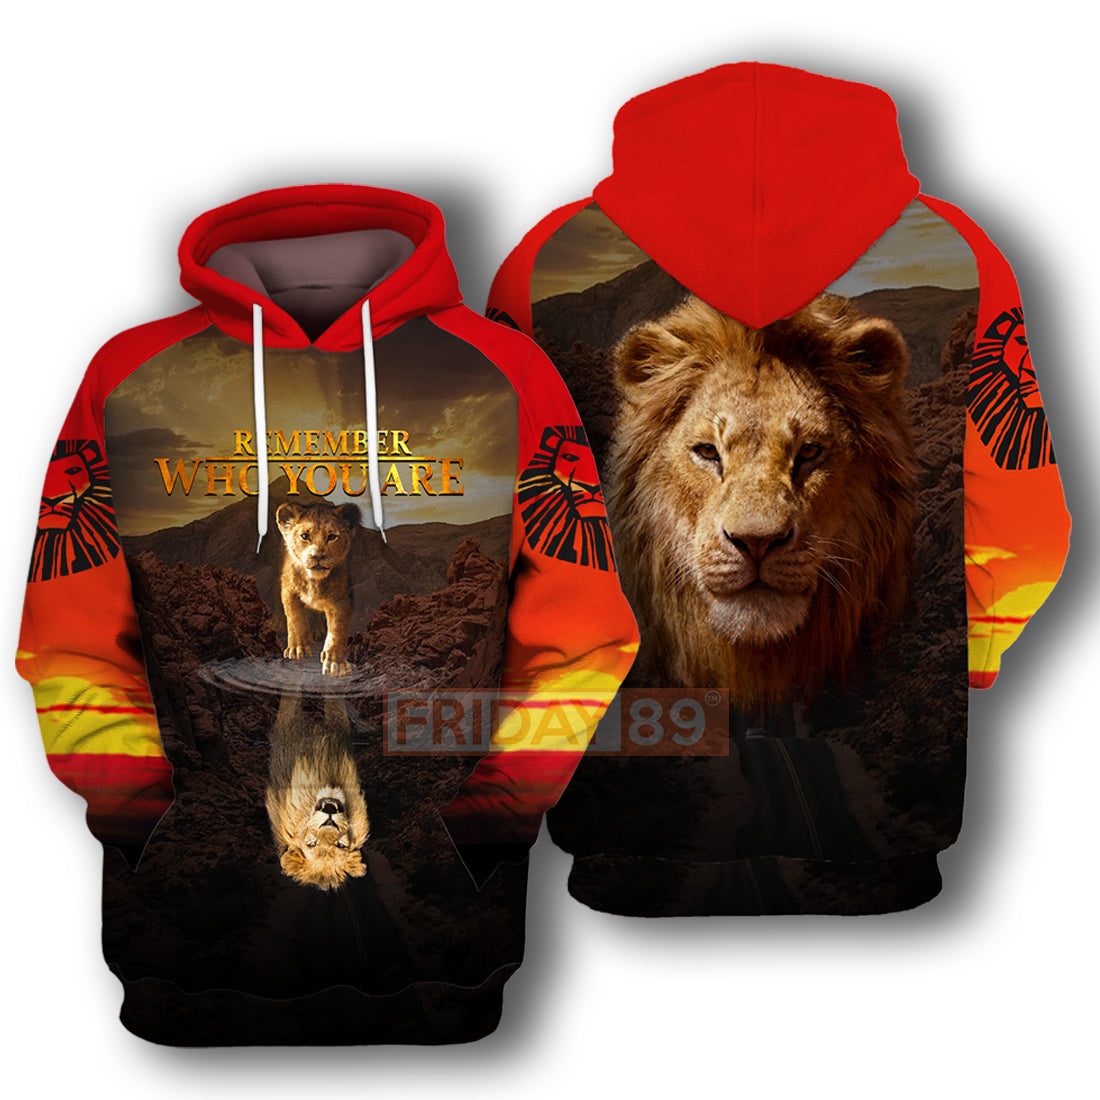 Unifinz LK T-shirt Remember Who You Are Simba Lion Face 3D T-shirt Cool DN LK Hoodie Sweater Tank 2022